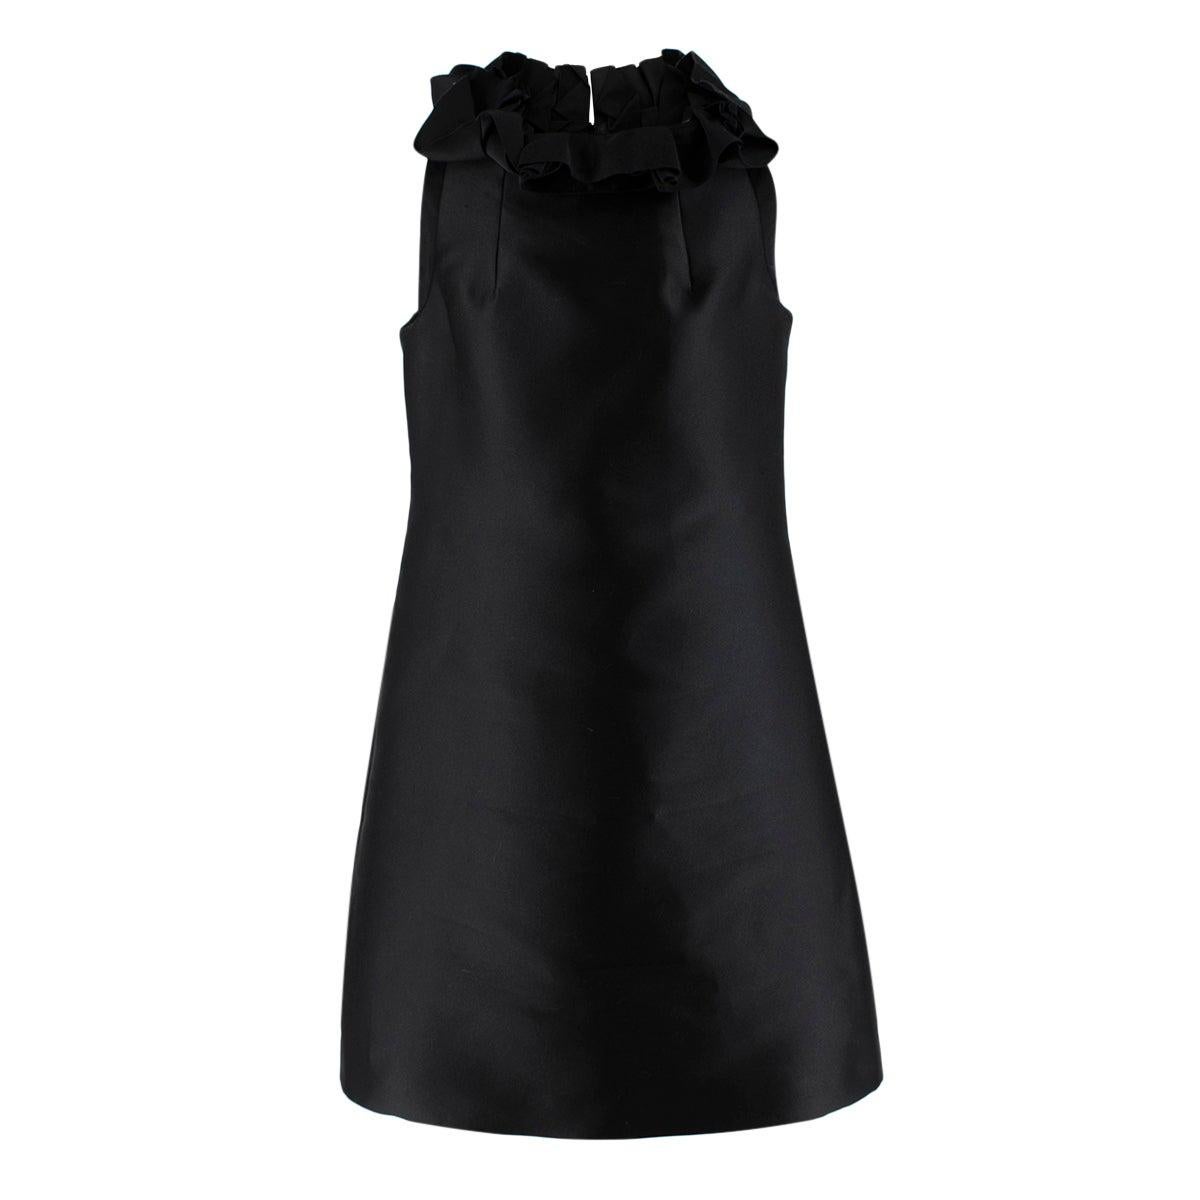 Lanvin Black Ruffled Cocktail Dress - US size 6 For Sale